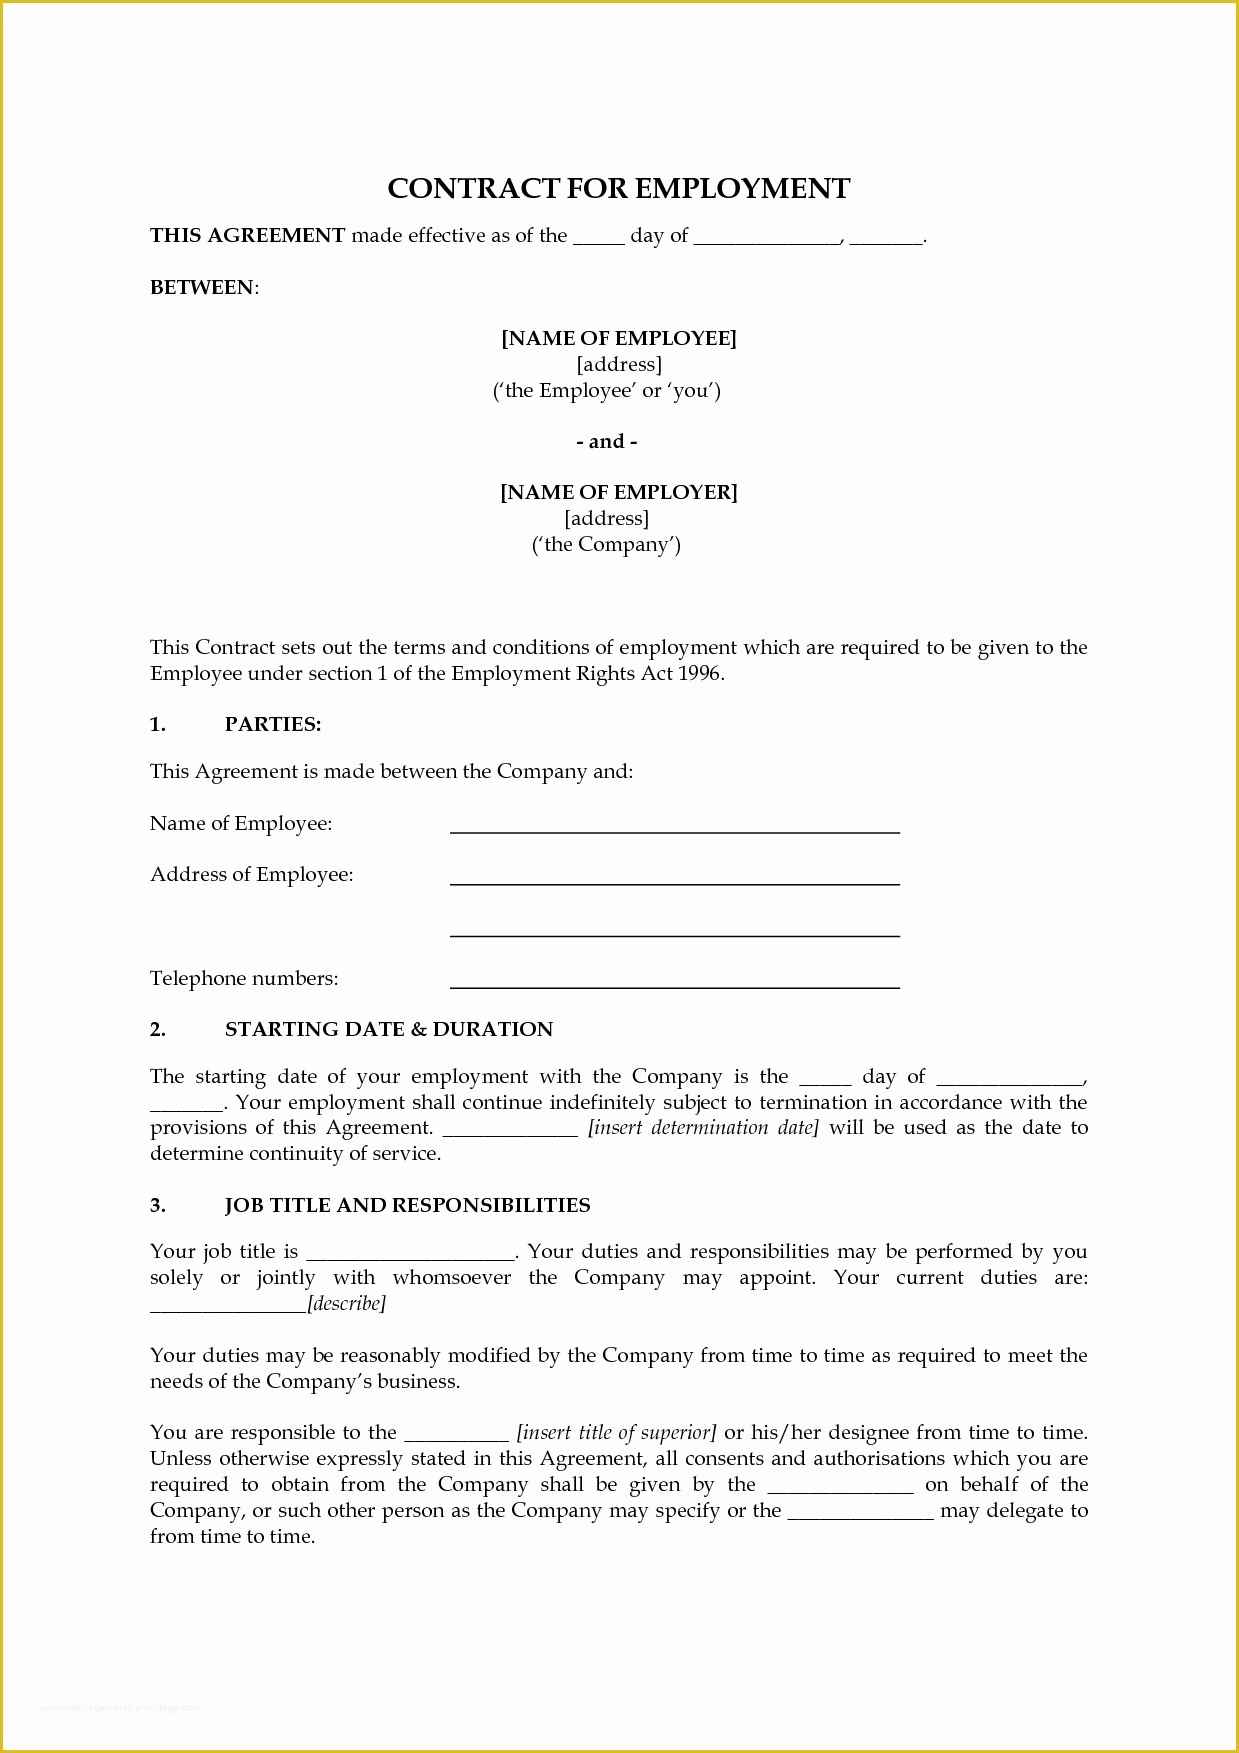 New Employee Contract Template Free Of Work Online Jobs From Home Job Search New York City It